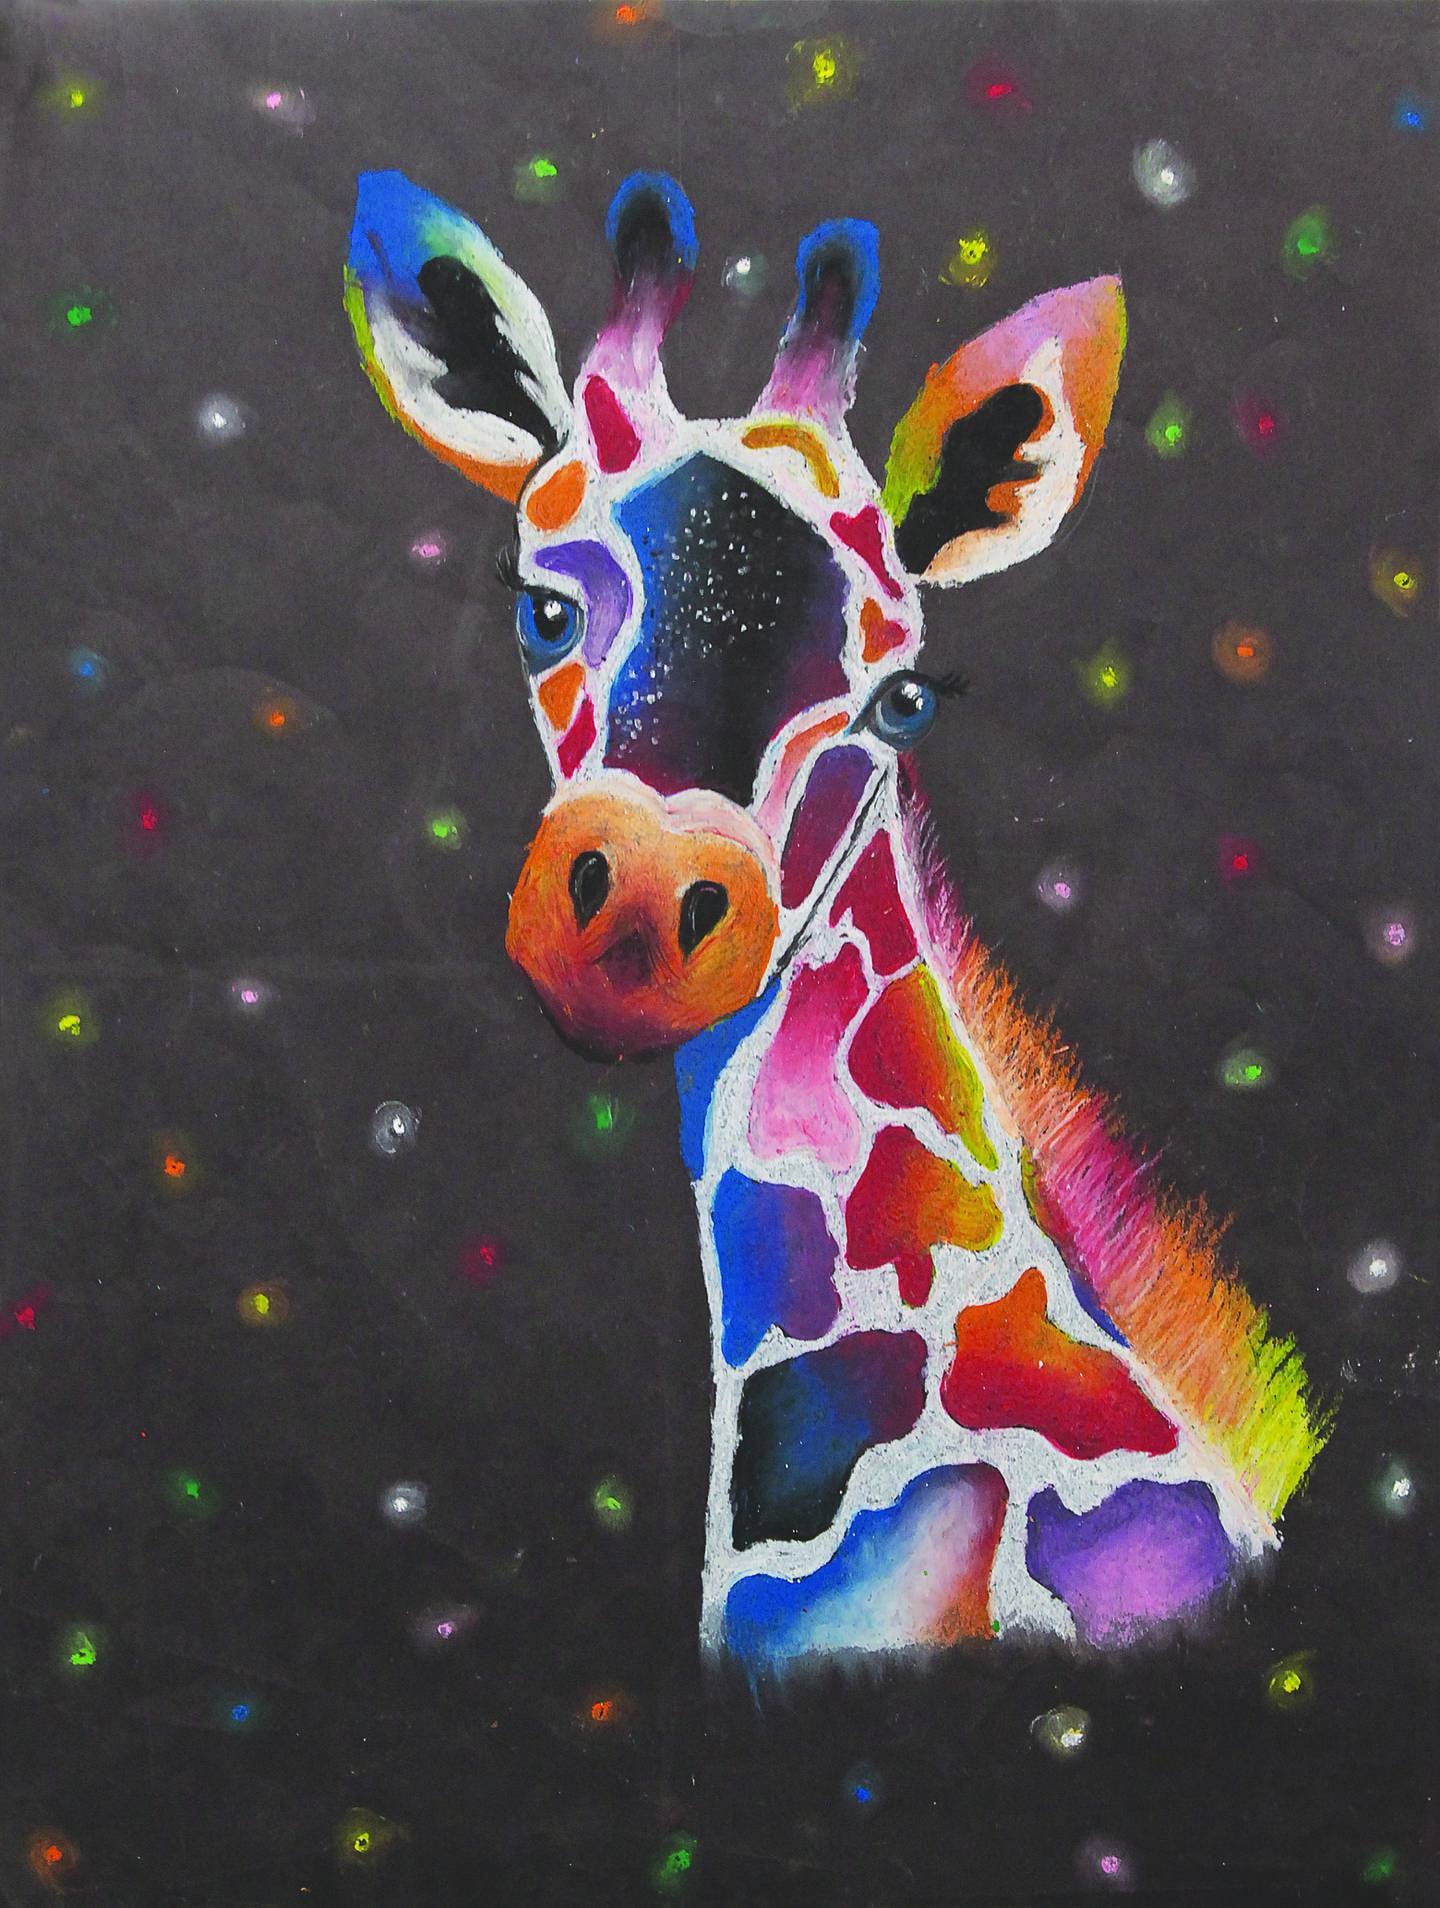 First place in the grades 5-8 category went to “Shakira the Giraffe,” an oil pastel piece by Cierra W., seventh grader at Morrison Junior High.